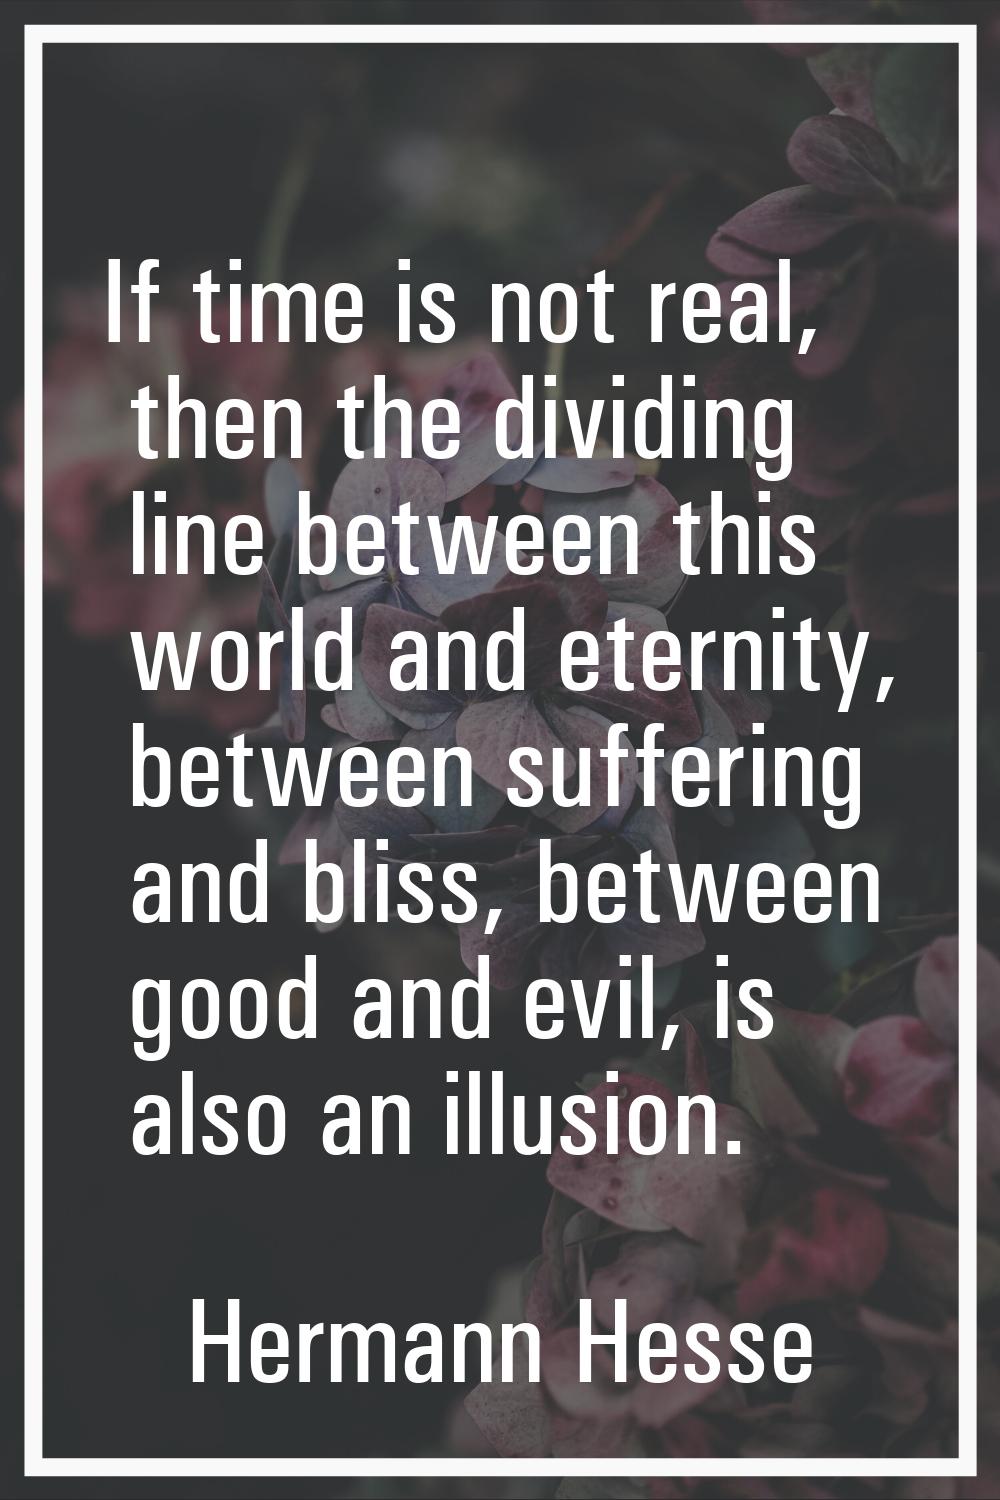 If time is not real, then the dividing line between this world and eternity, between suffering and 